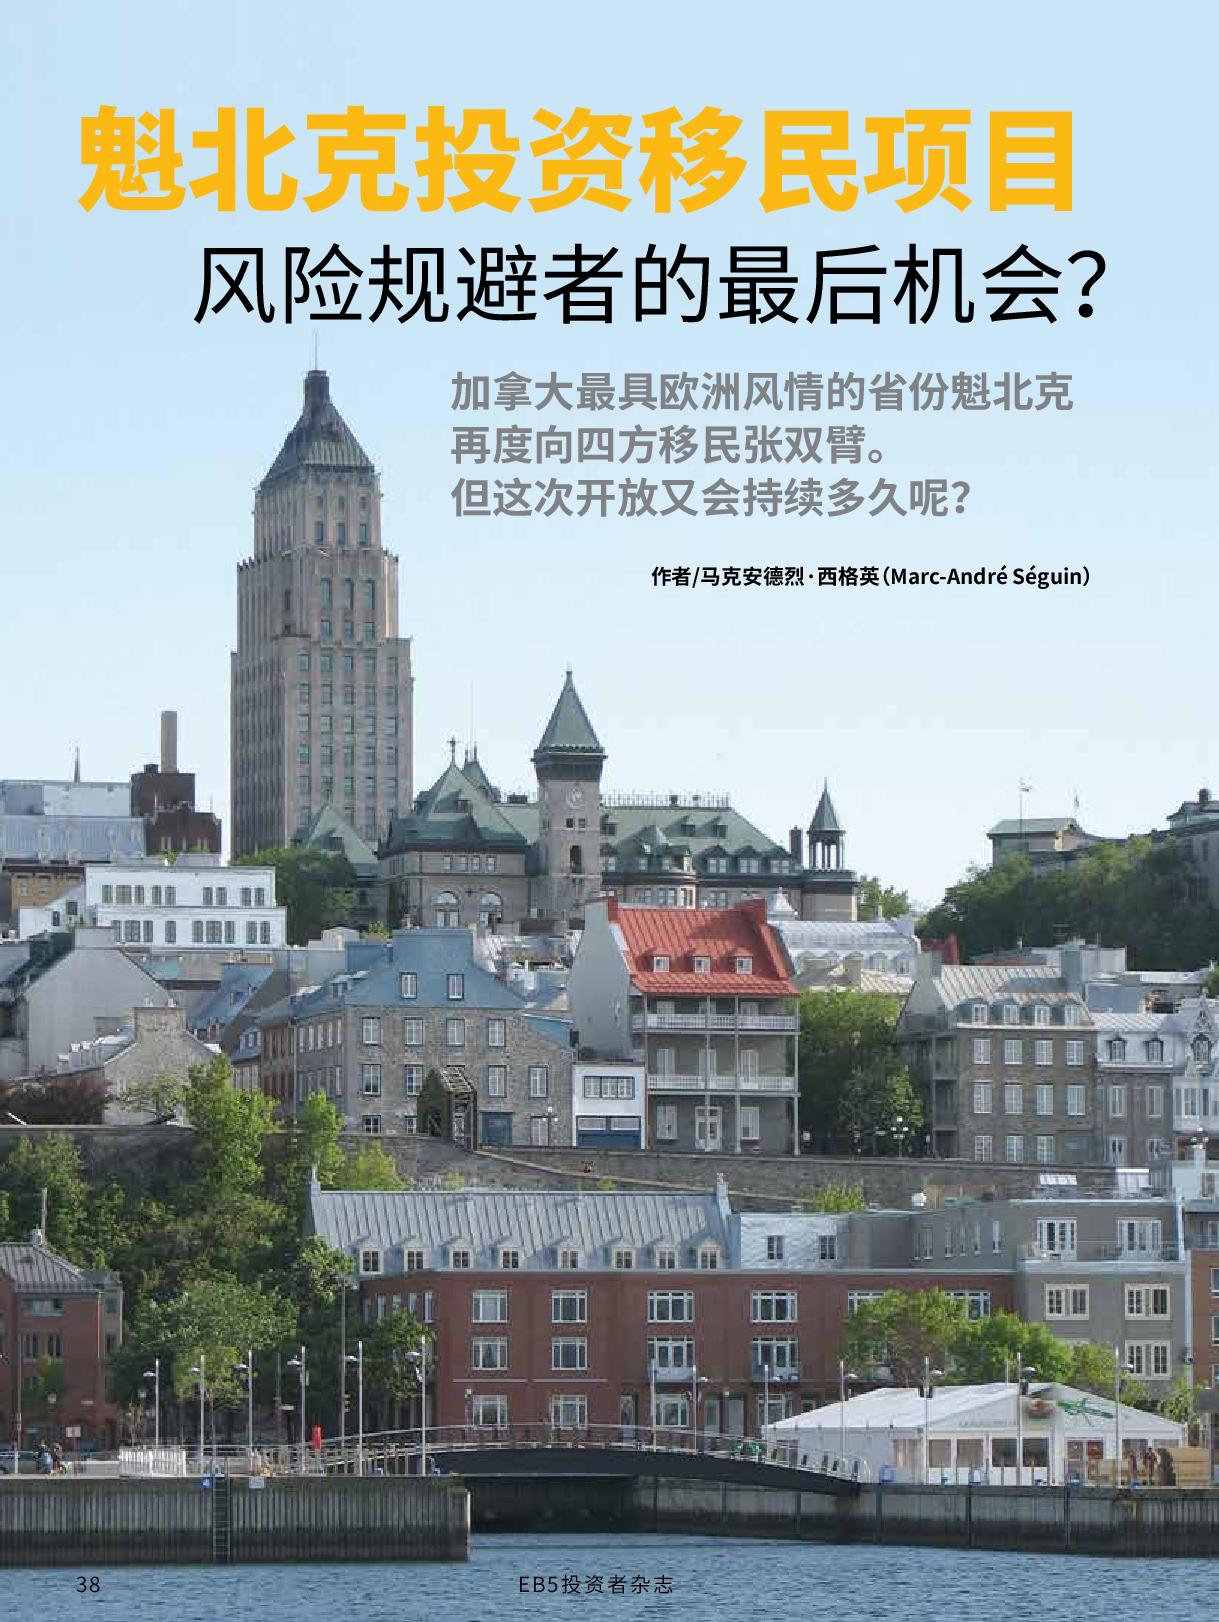 Renaissance Capital and Our Article in EB5 Investors Magazine